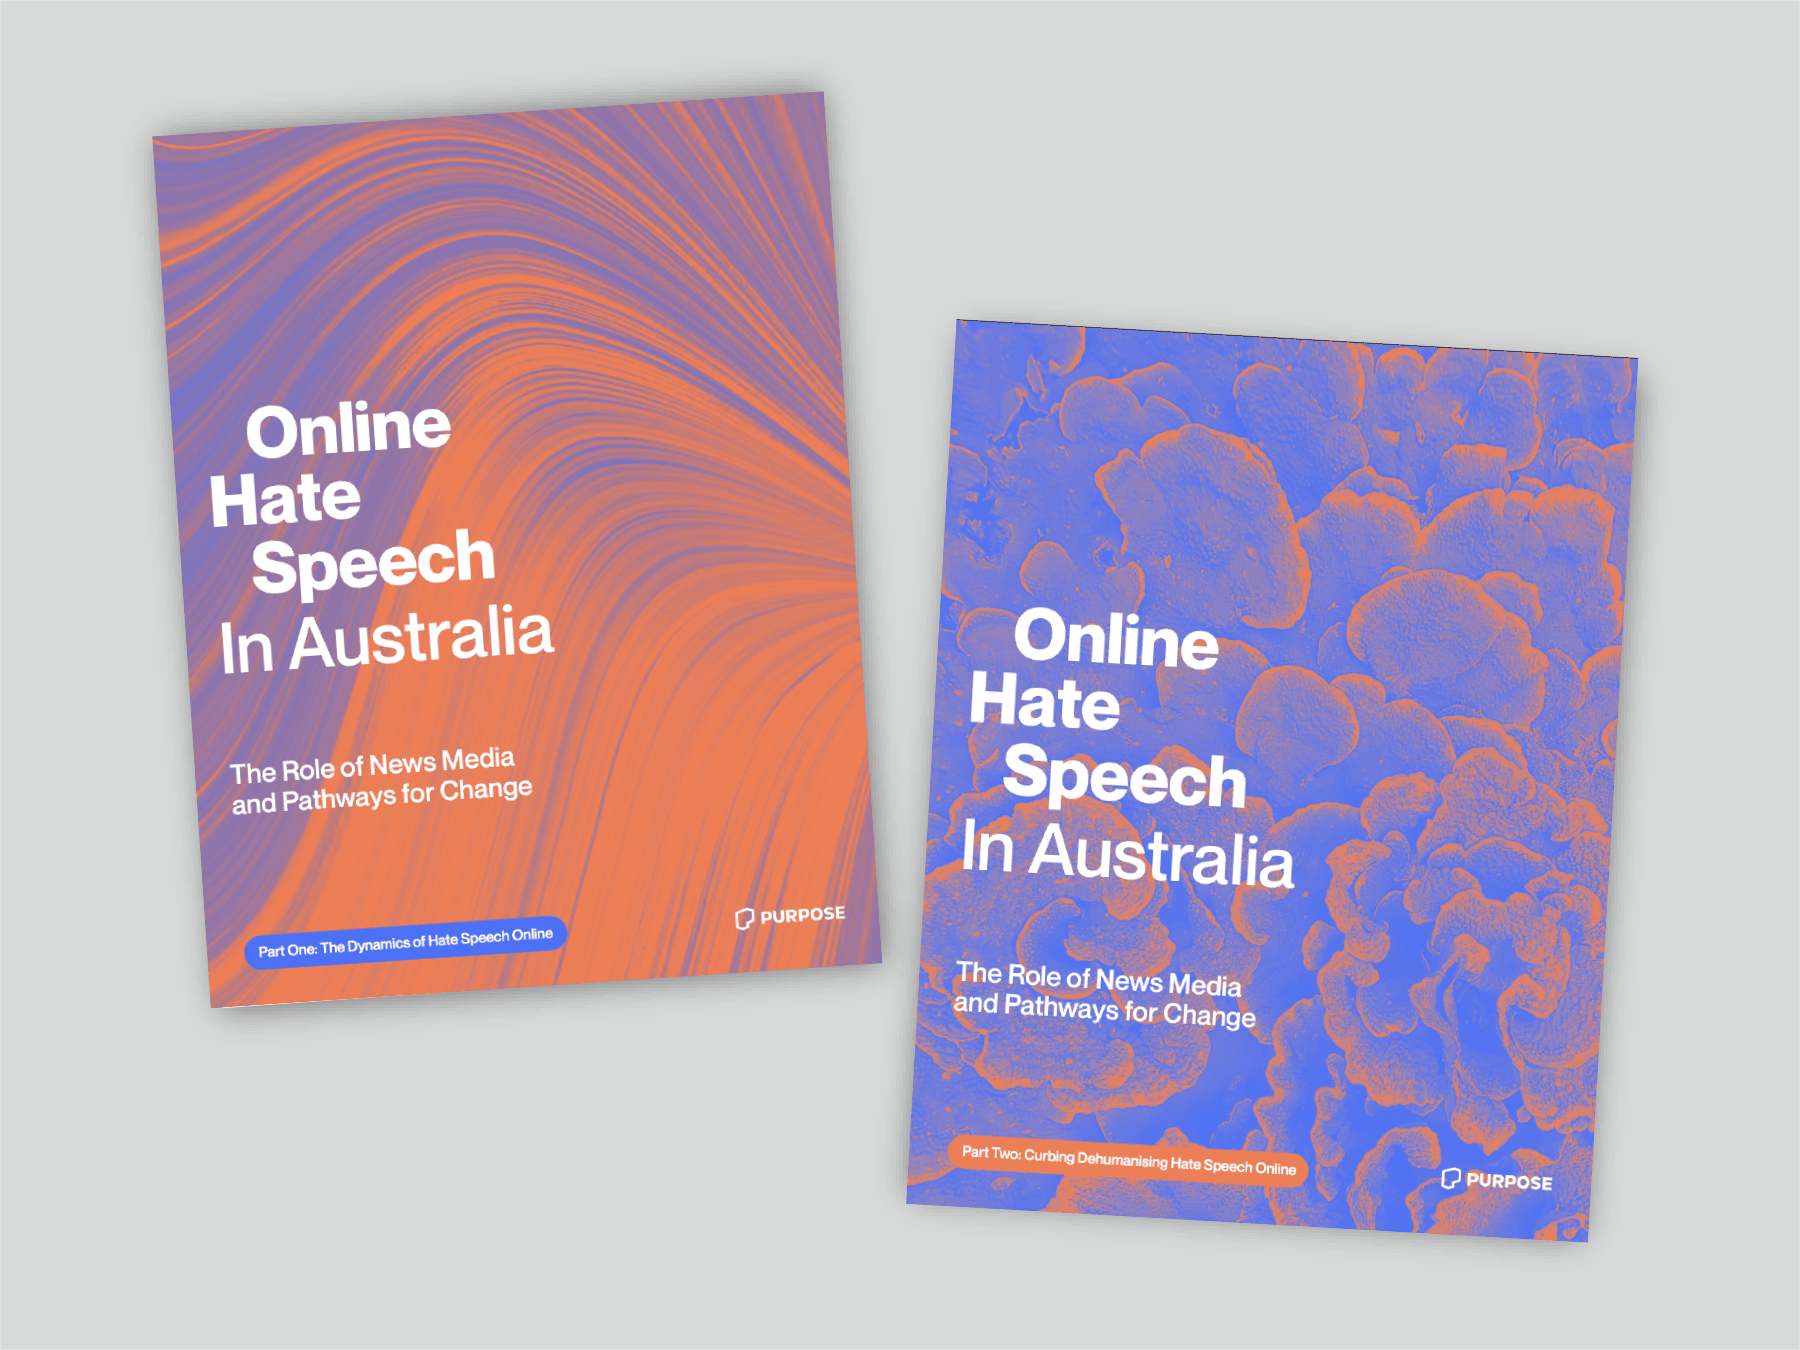 Two reports documents on a grey surface, both titled Online Hate Speech in Australia. One has an orange textured cover and the subtitle: 'The Dynamics of Hate Speech Online' and the other has a more blue textured cover, and the subtitle 'Curbing Dehumanising Hate Speech Online'.